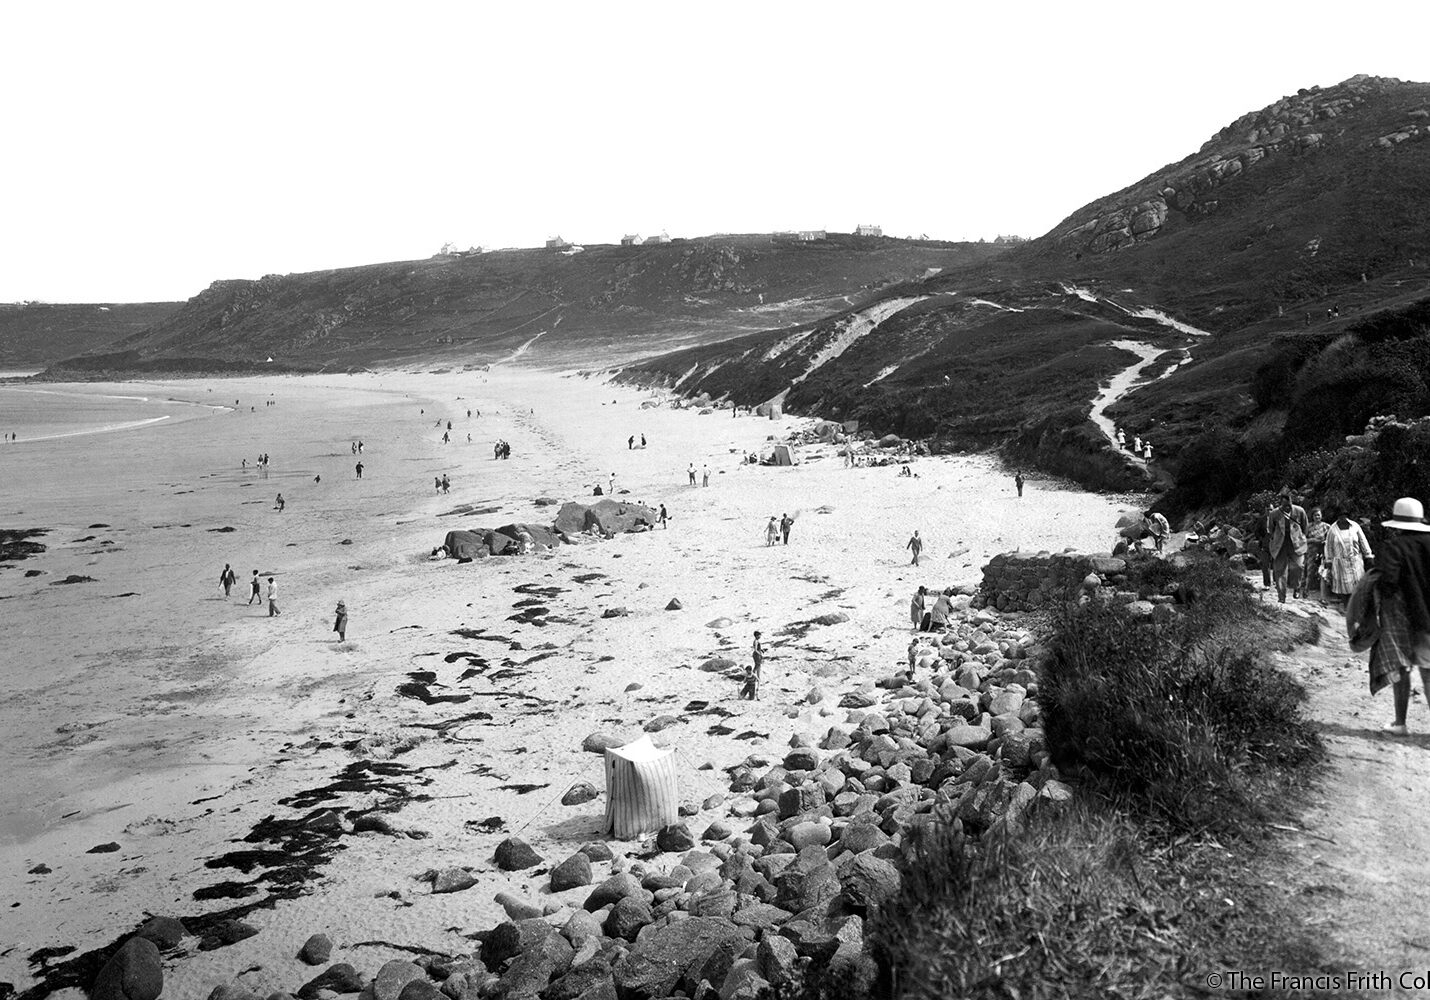 Sennen Cove, Pathway to Whitesand Bay, 1931. Image courtesy of the Francis Frith collection.